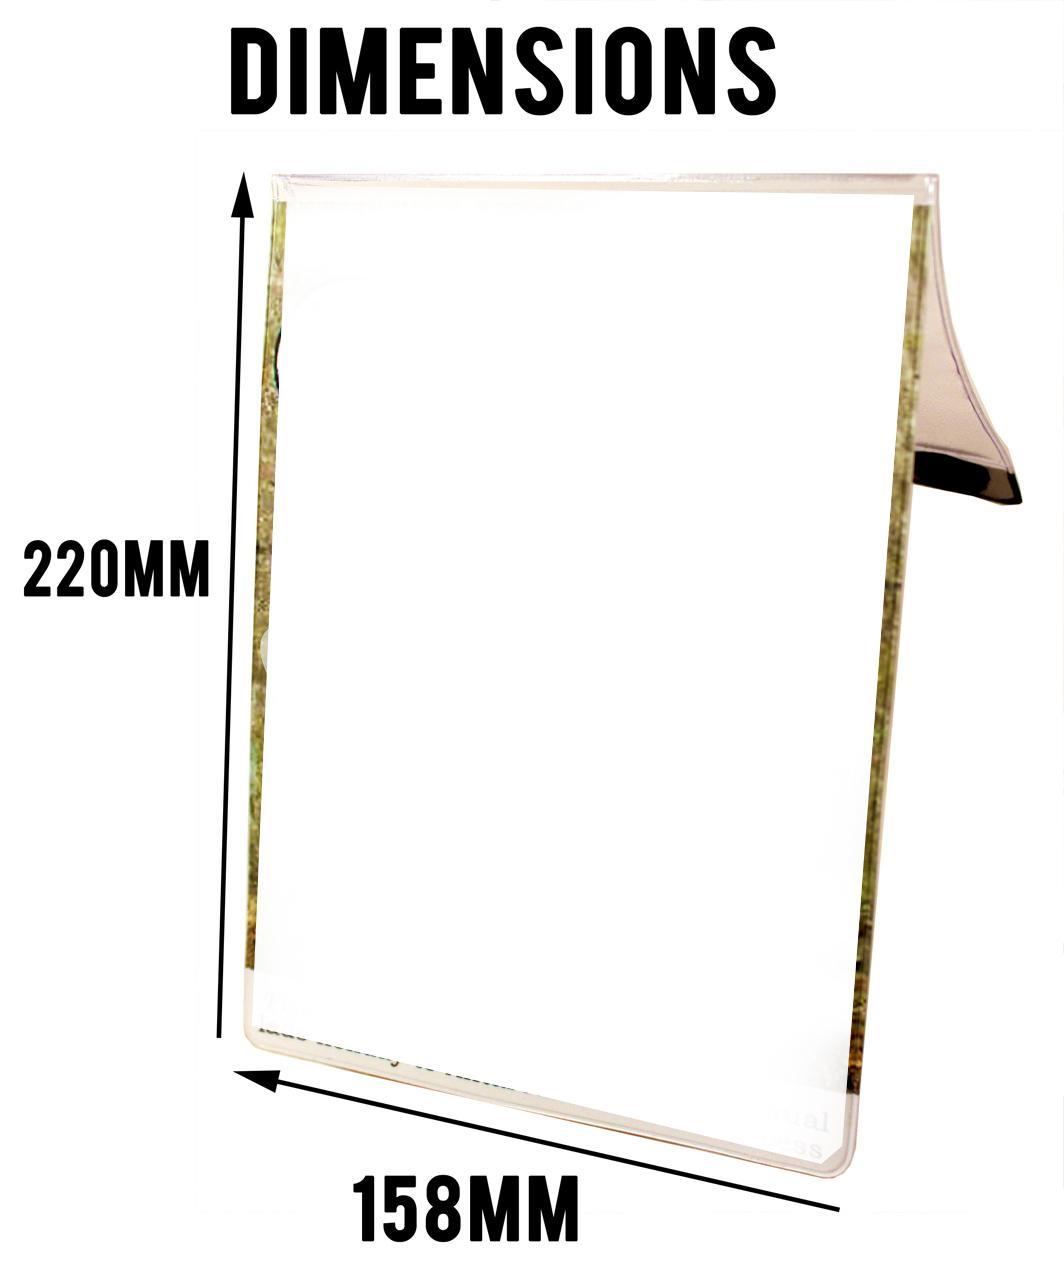 Document Cover dimensions